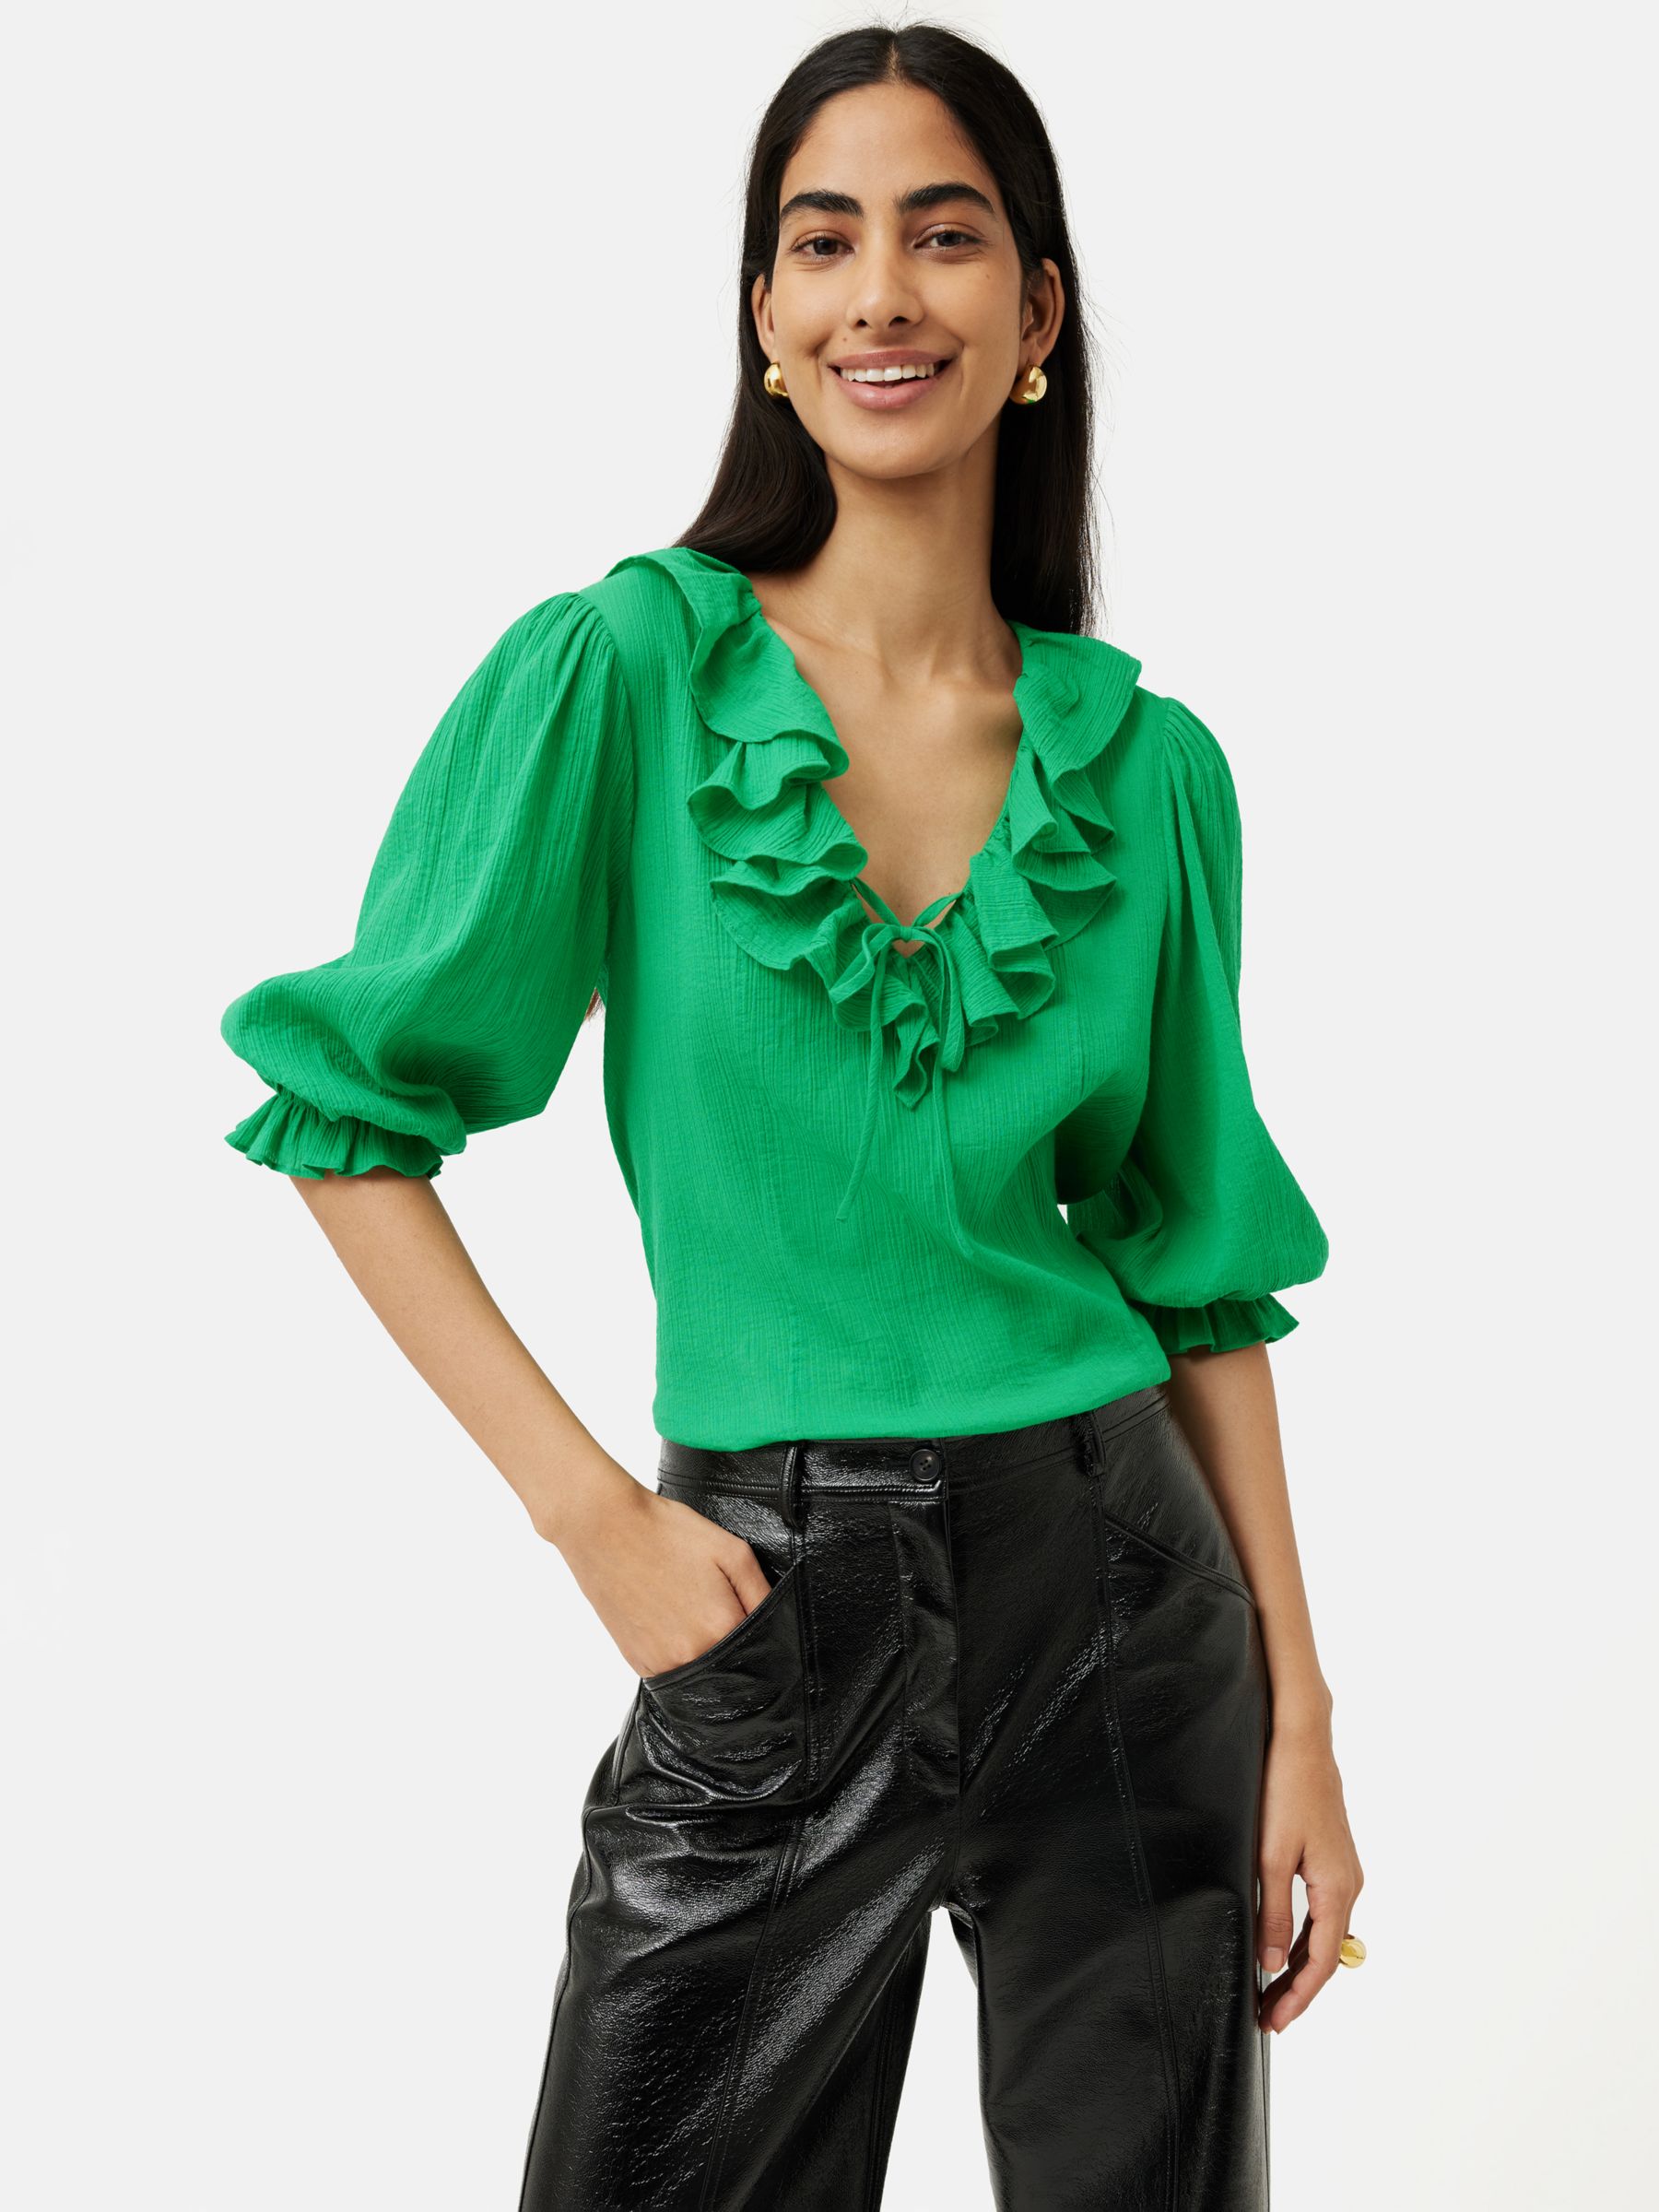 Abe Recollection Ud Jigsaw Crinkle Ruffle Top, Green, 6